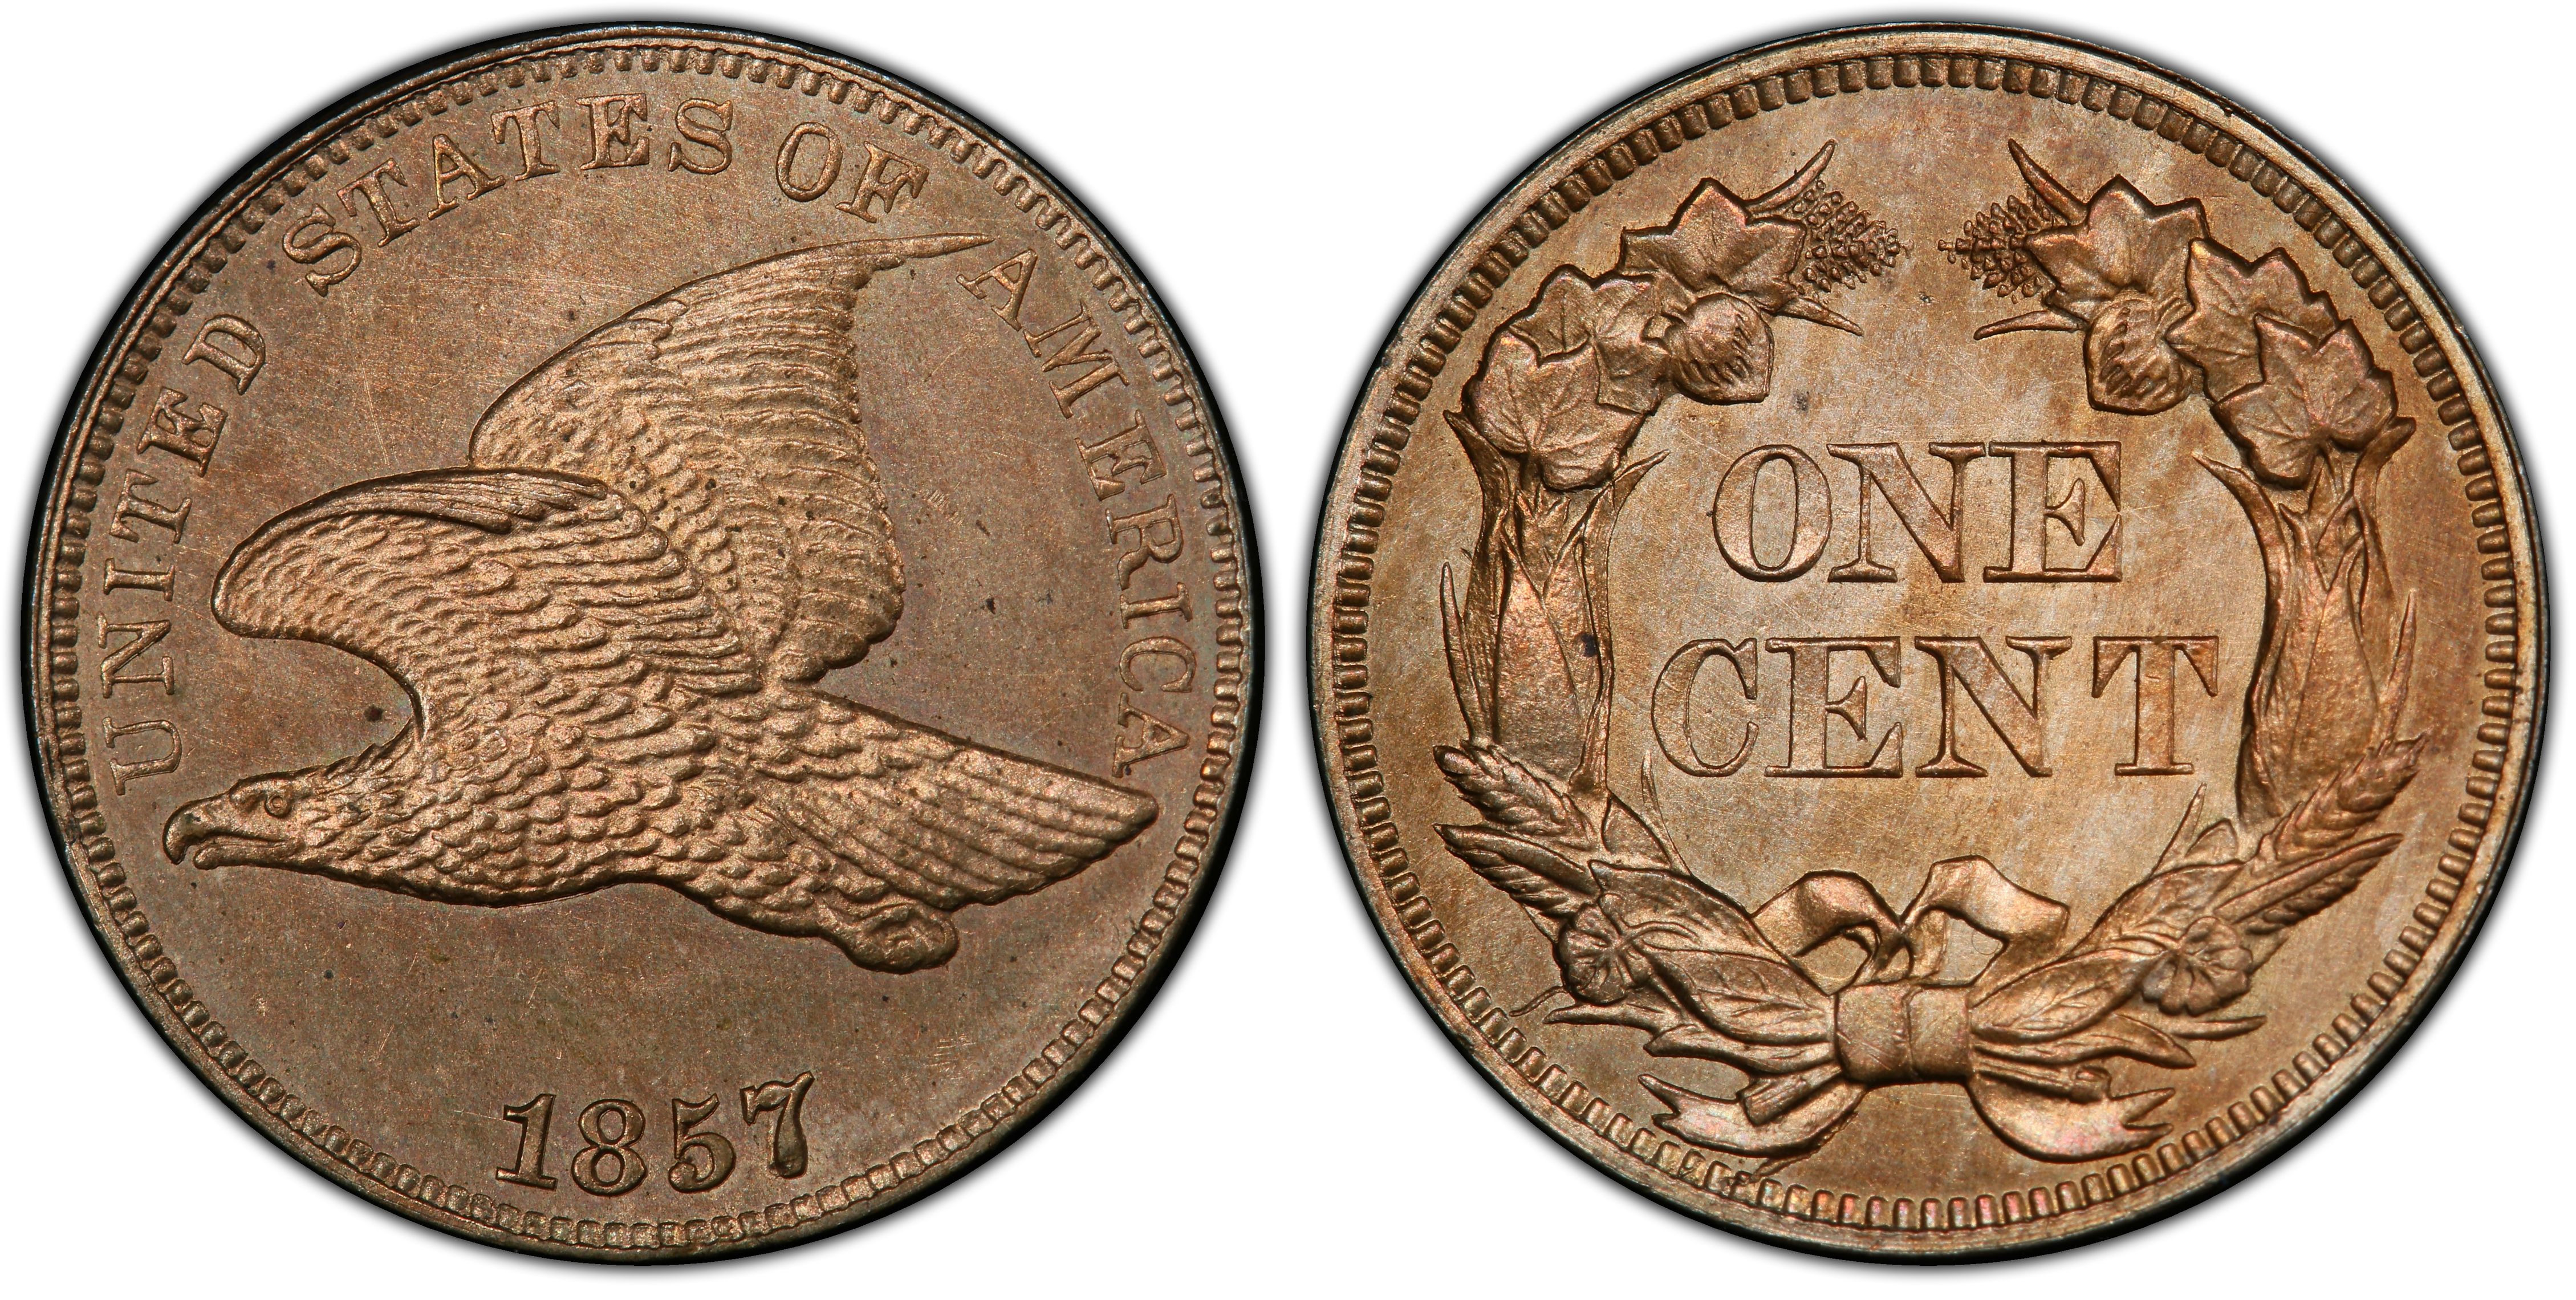 1857 1C Large Date, BN (Regular Strike) Braided Hair Cent - PCGS CoinFacts